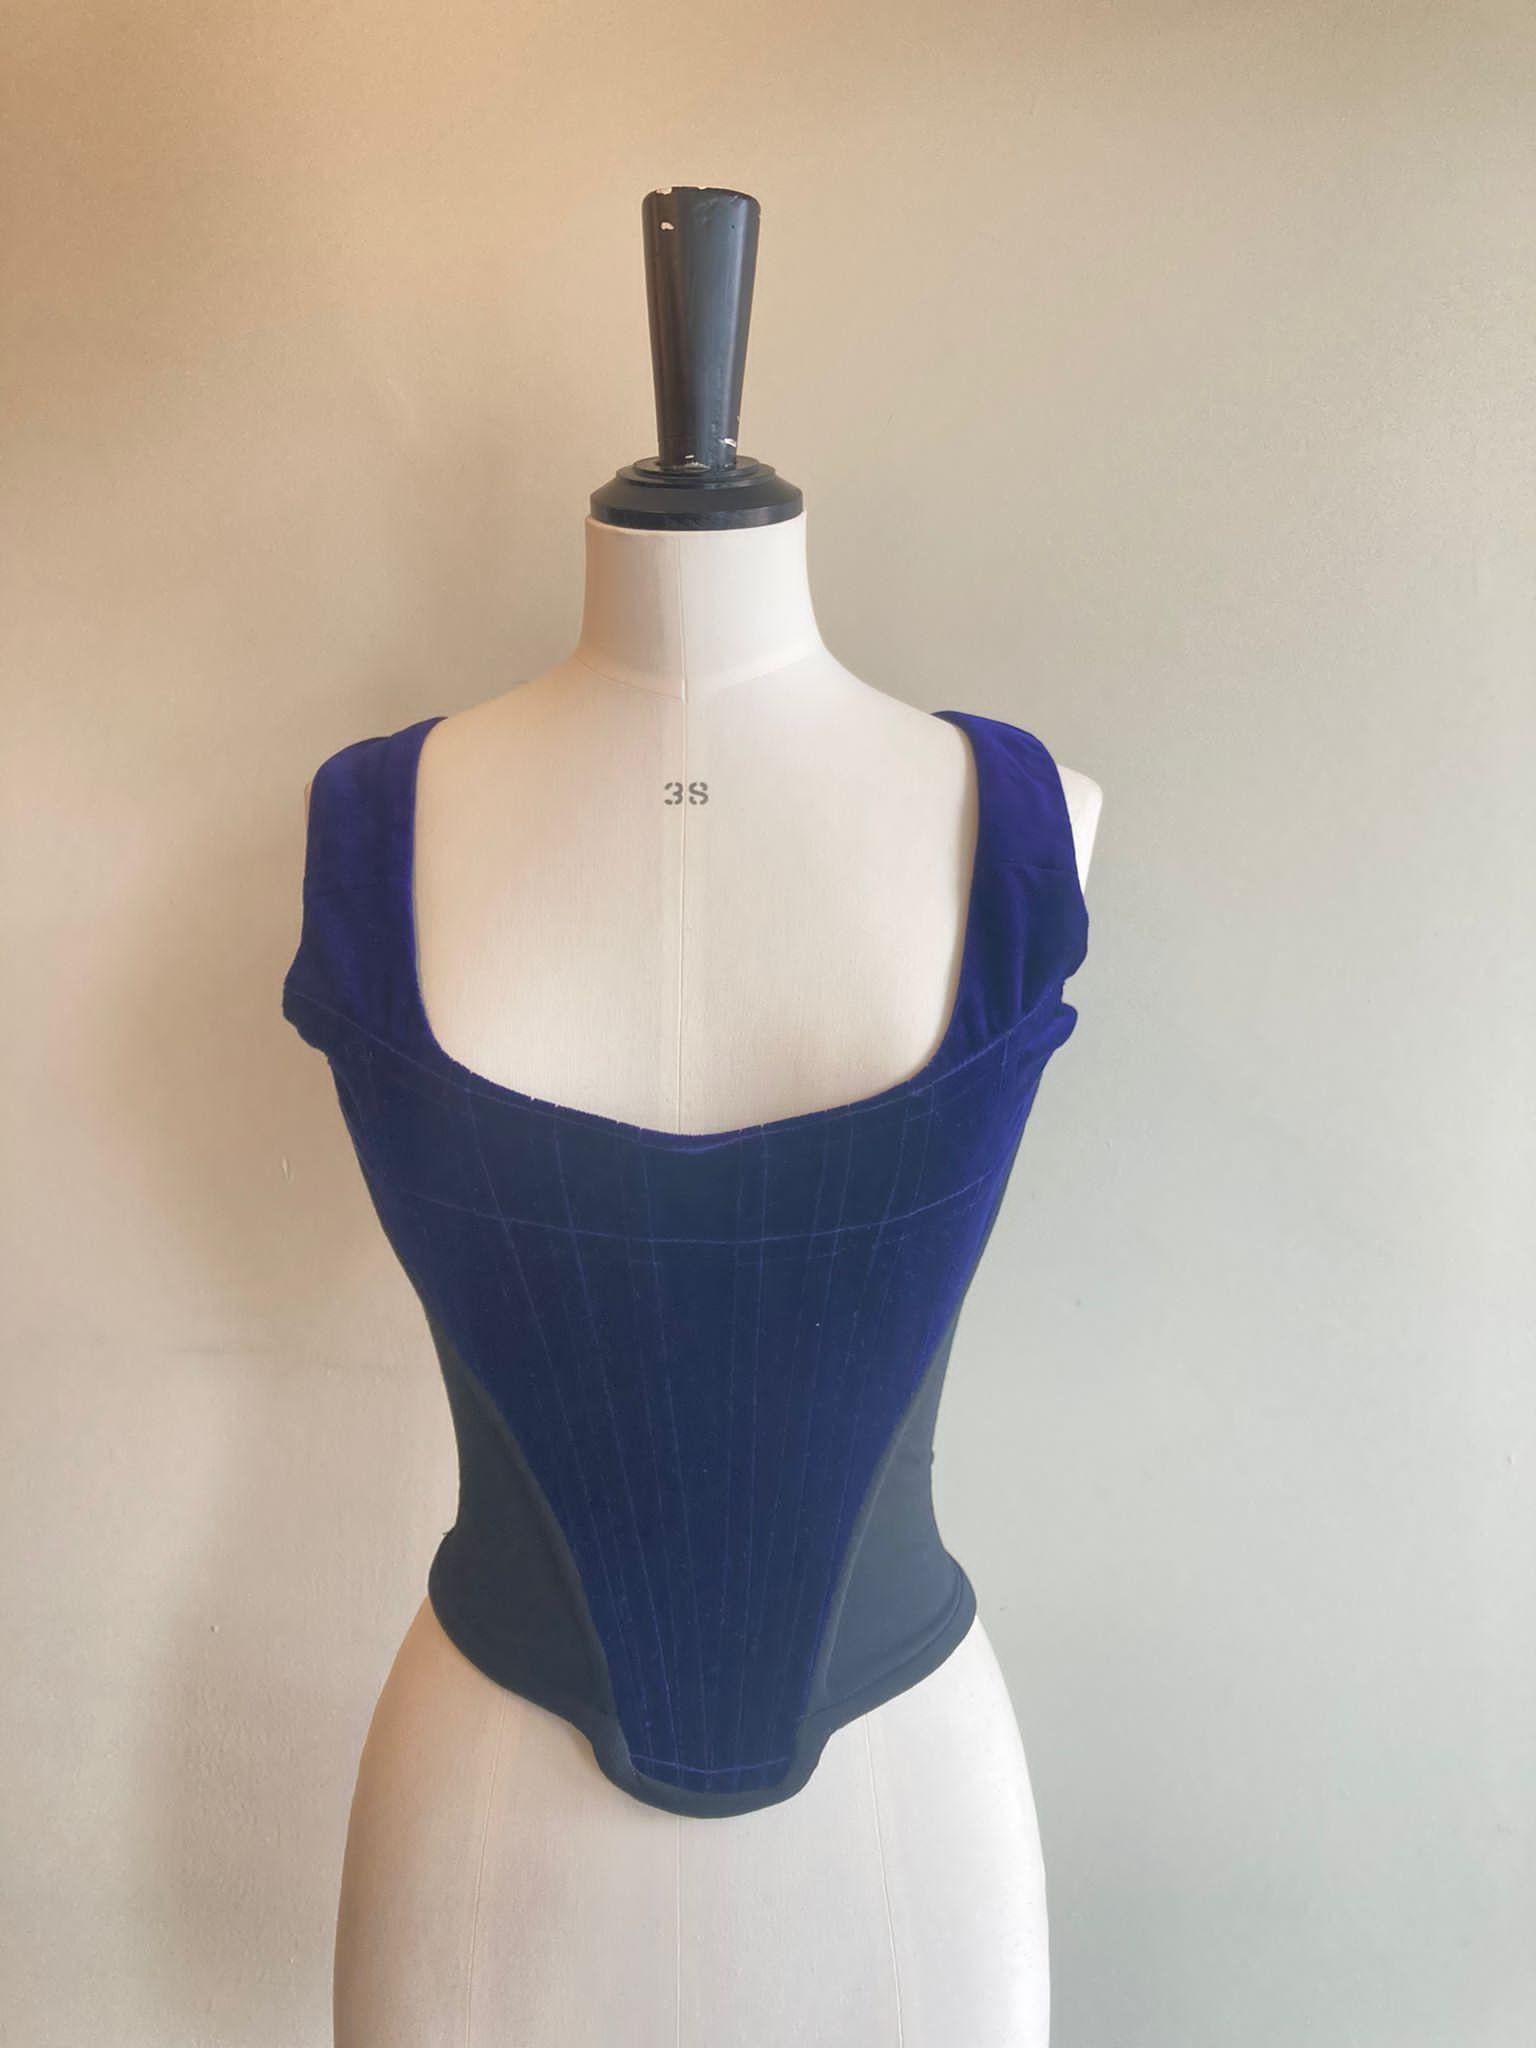 Vintage Vivienne Westwood velvet corset from the eponymous brand. Midnight blue cotton velvet with black cotton side panels. Structured front and back sections, with v-shaped structure at the front. Marked size UK 10. Fabric content: 100% cotton